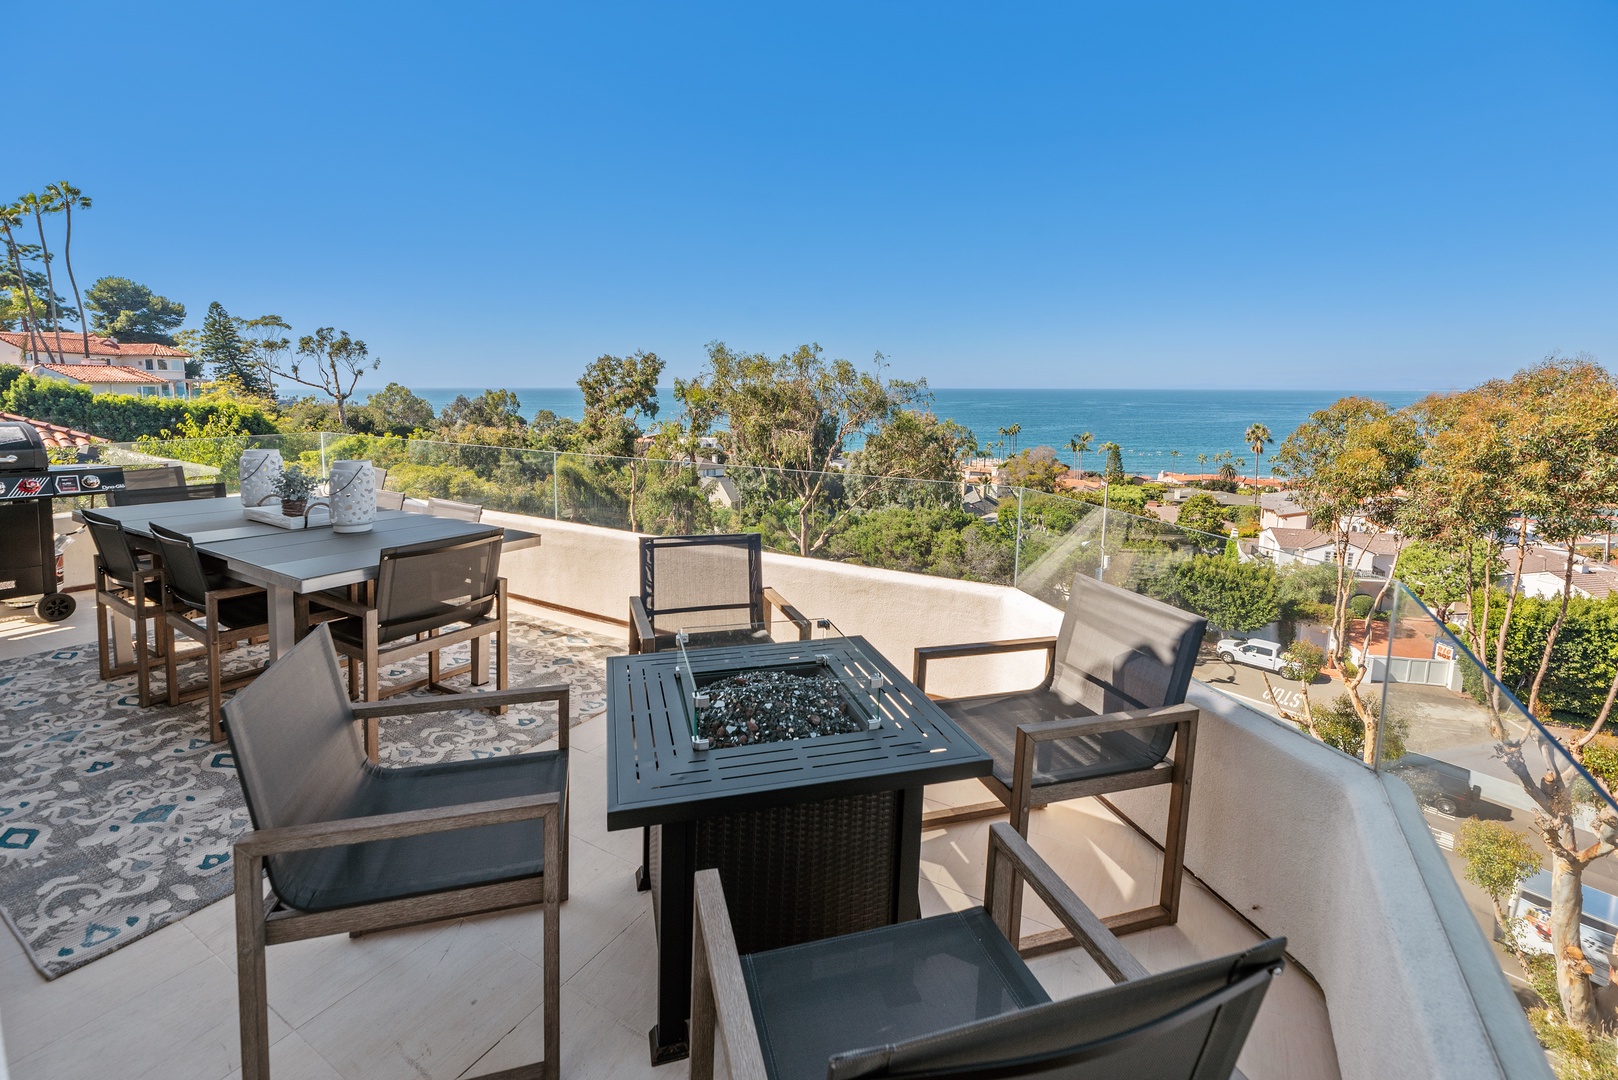 La Jolla Vacation Rentals, Coastal Lookout - Life just doesn't get any better than this!